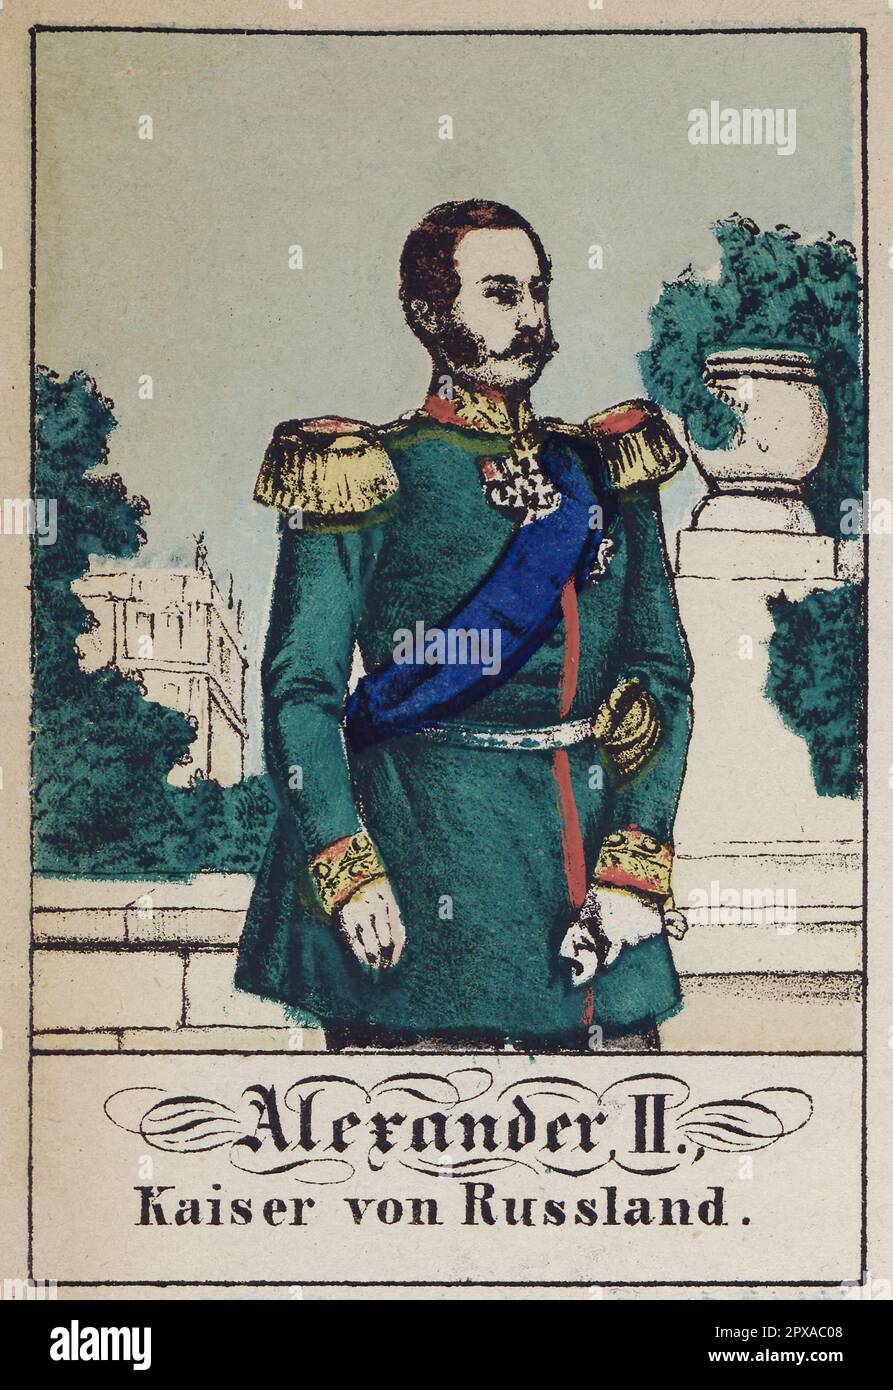 Сolor lithography of Alexander II of Russia. 1861 Alexander II (1818–1881) was Emperor of Russia, King of Poland and Grand Duke of Finland from 2 March 1855 until his assassination in 1881 Stock Photo